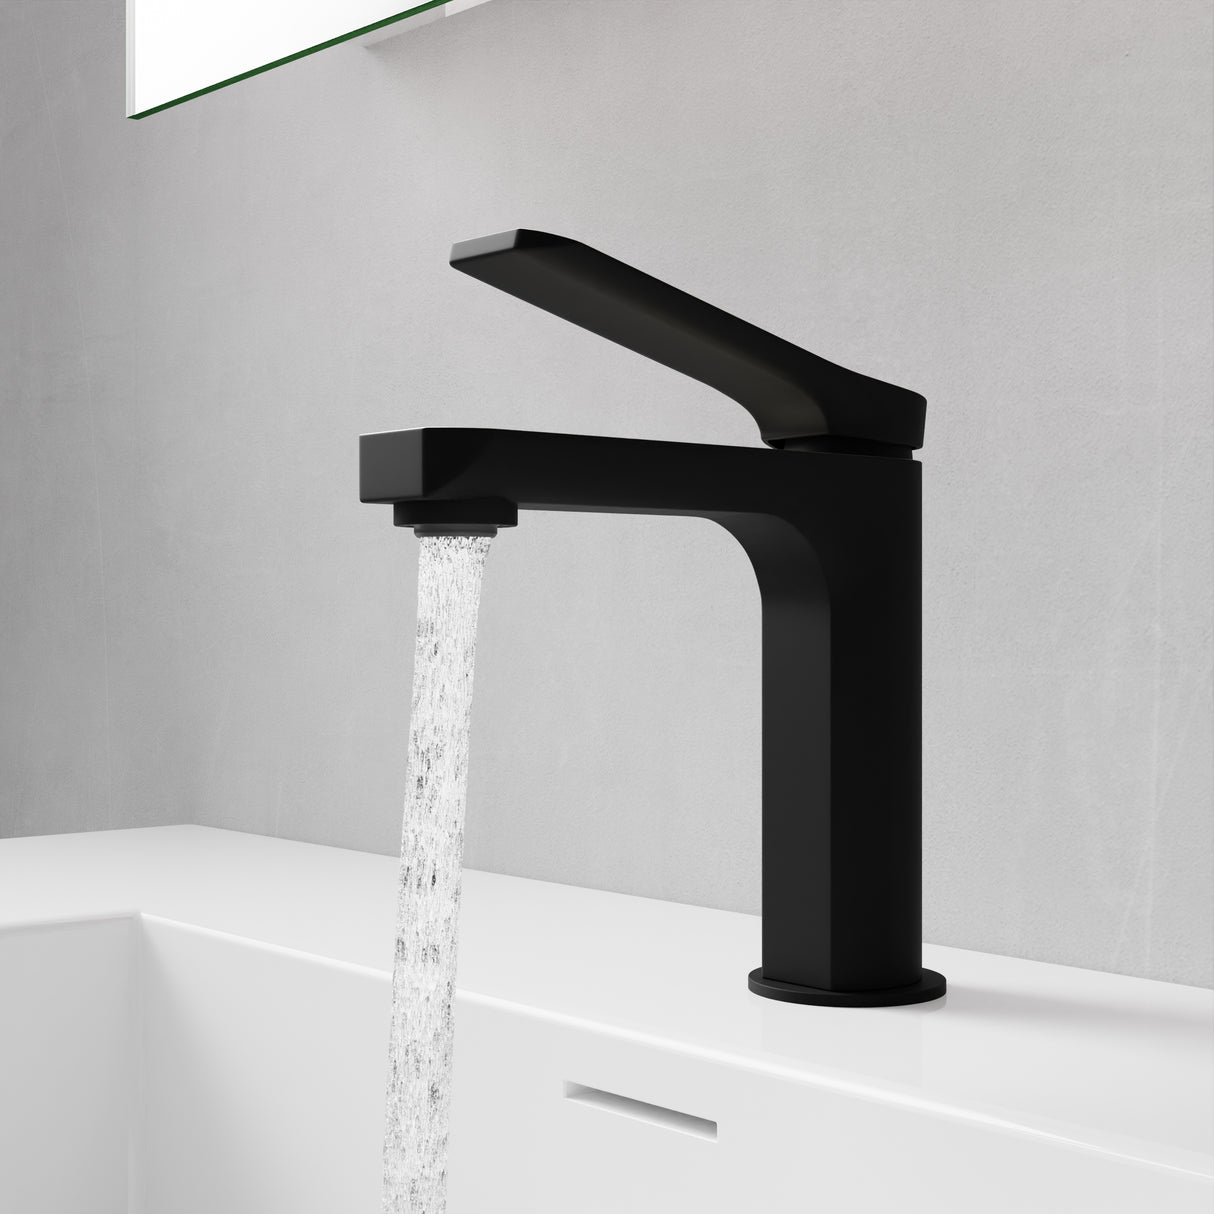 ANZZI L-AZ900MB-BN Single Handle Single Hole Bathroom Faucet With Pop-up Drain in Matte Black & Brushed Nickel